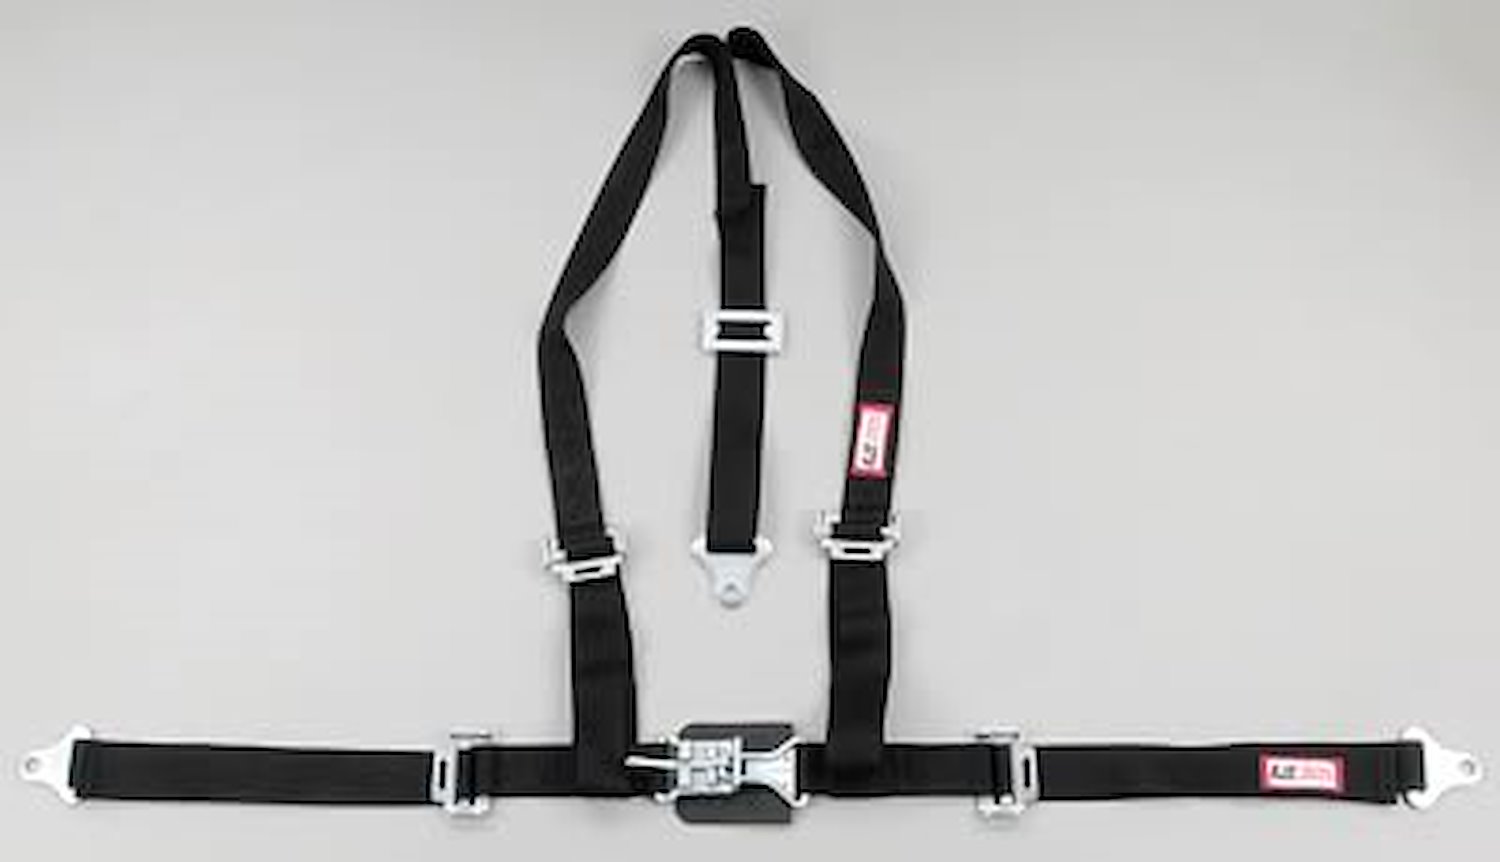 NON-SFI L&L HARNESS 2 PULL DOWN Lap Belt w/Adjuster 2 S.H. Y FLOOR MOUNT w/STERNUM STRAP ALL WRAP ENDS BLUE